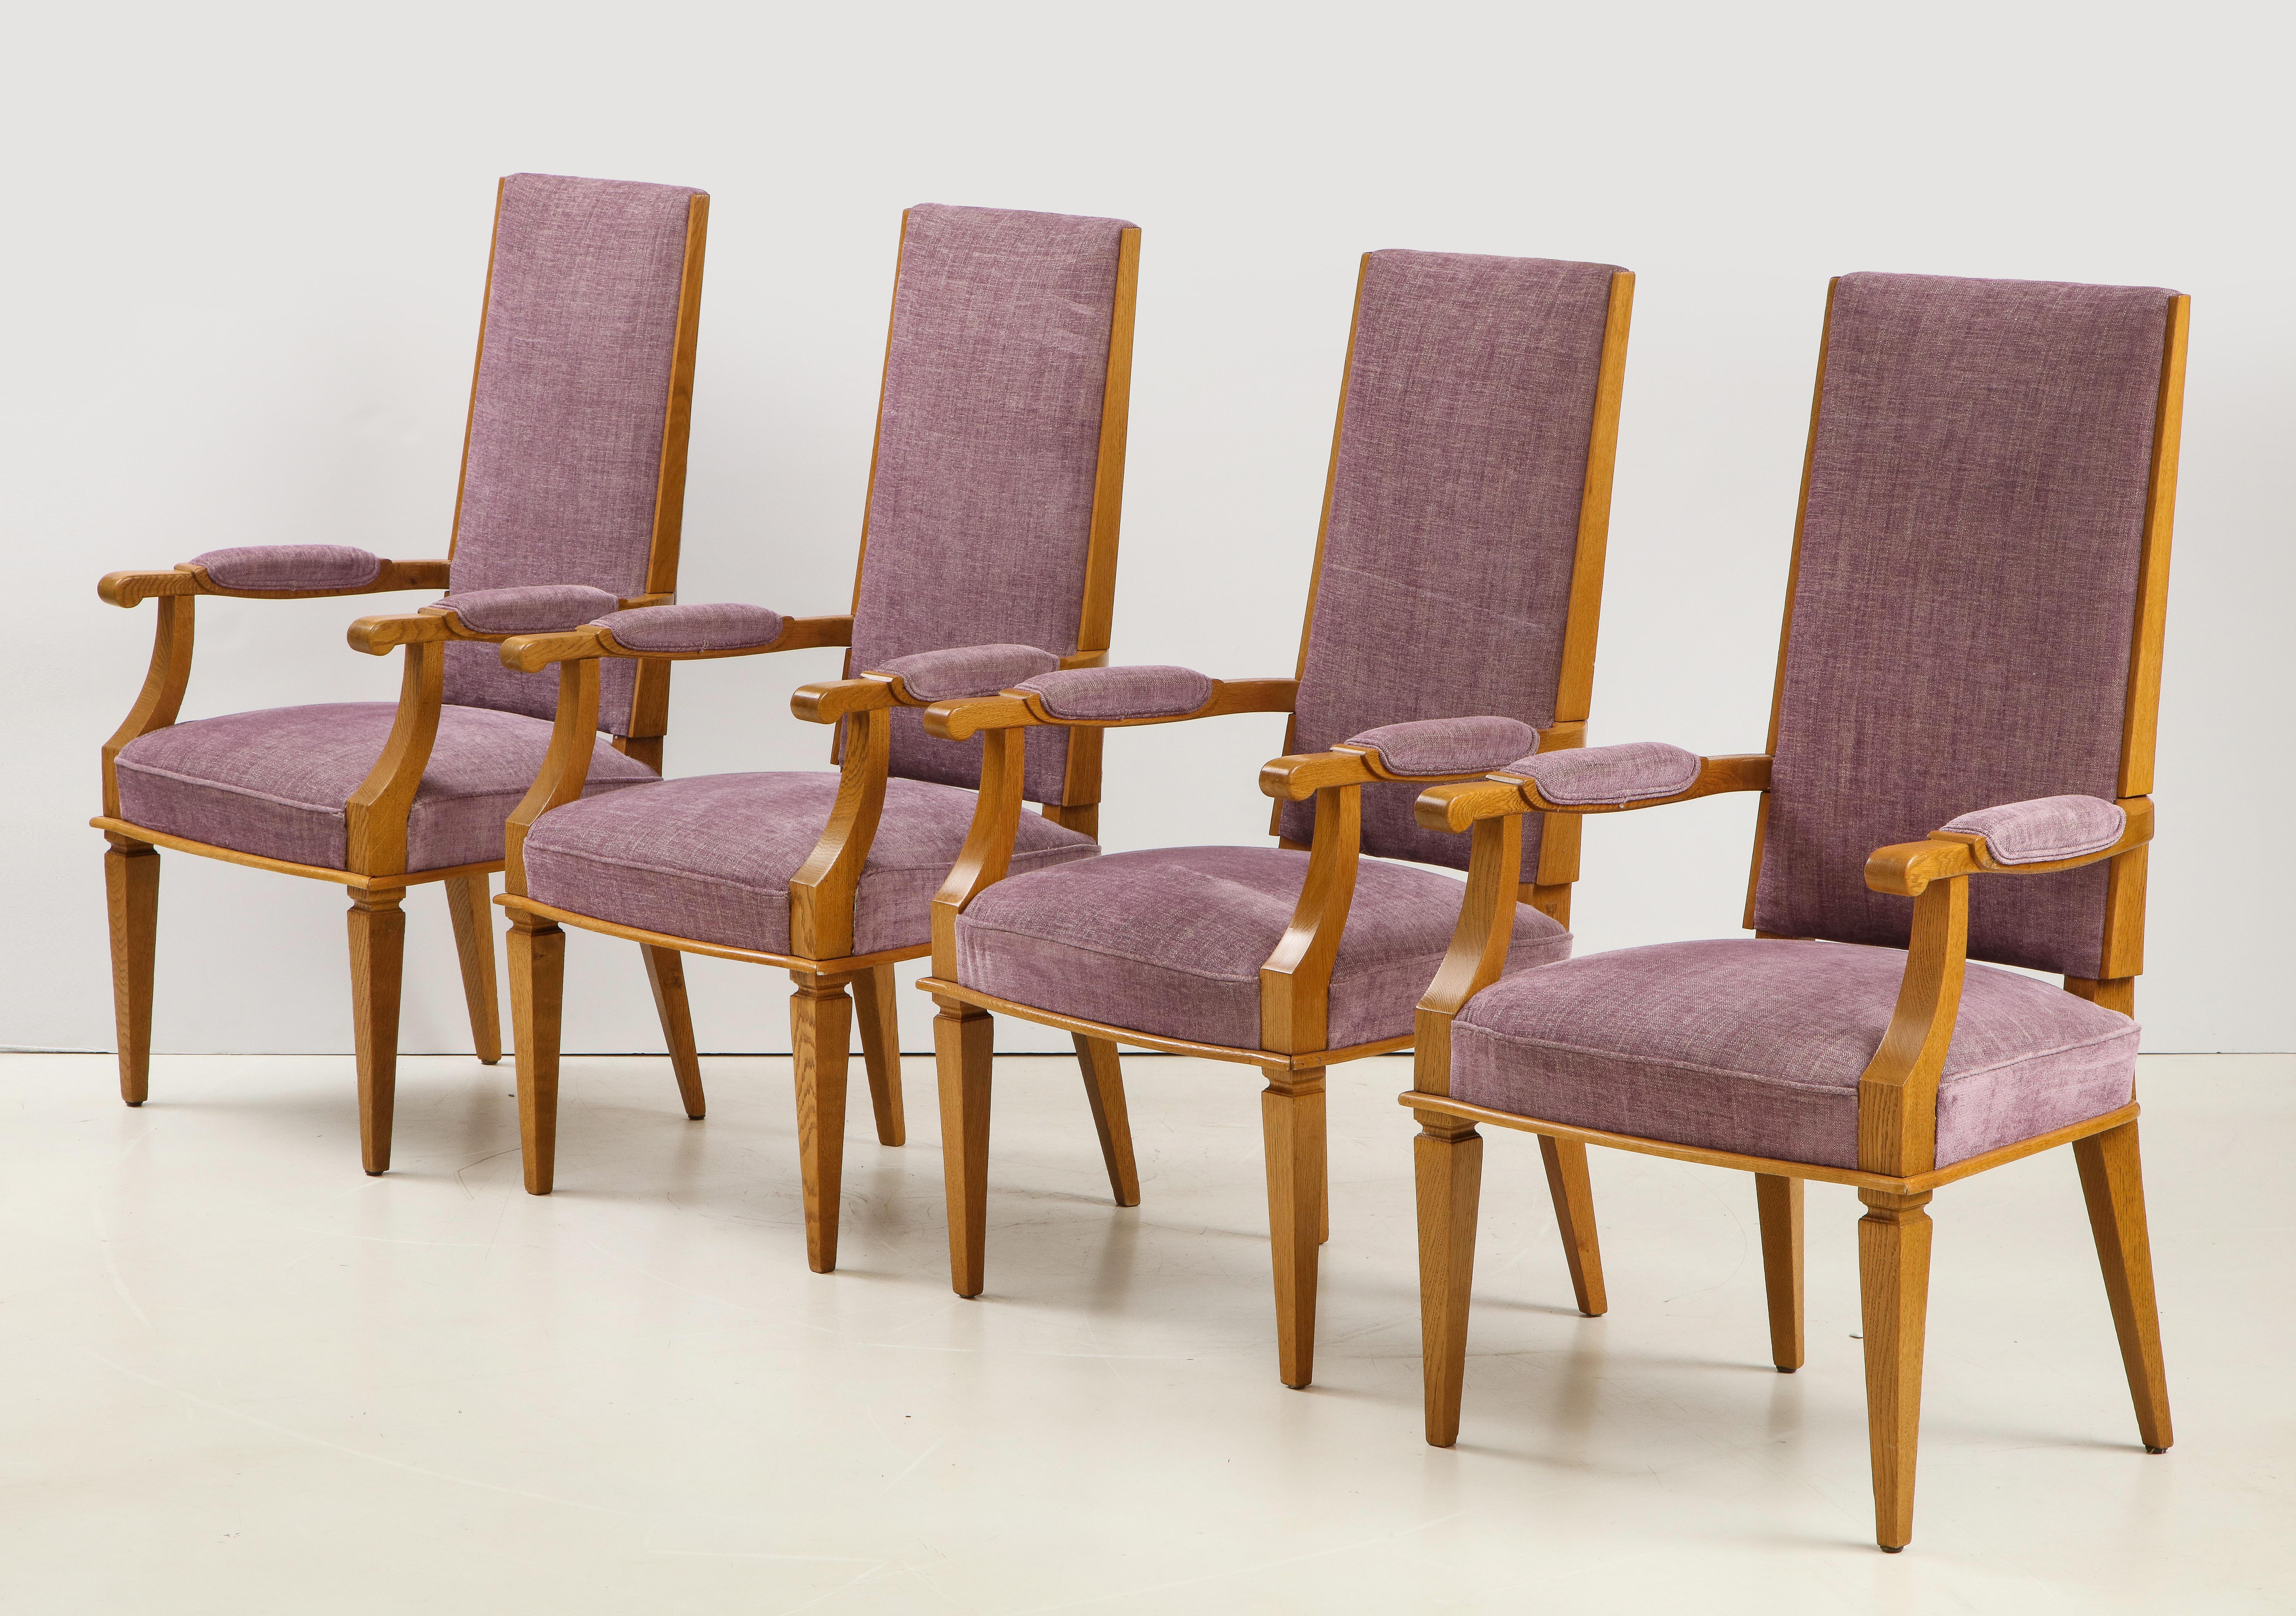 Set of four Art Deco oak armchairs by Jacques Adnet upholstered in fuschia color.